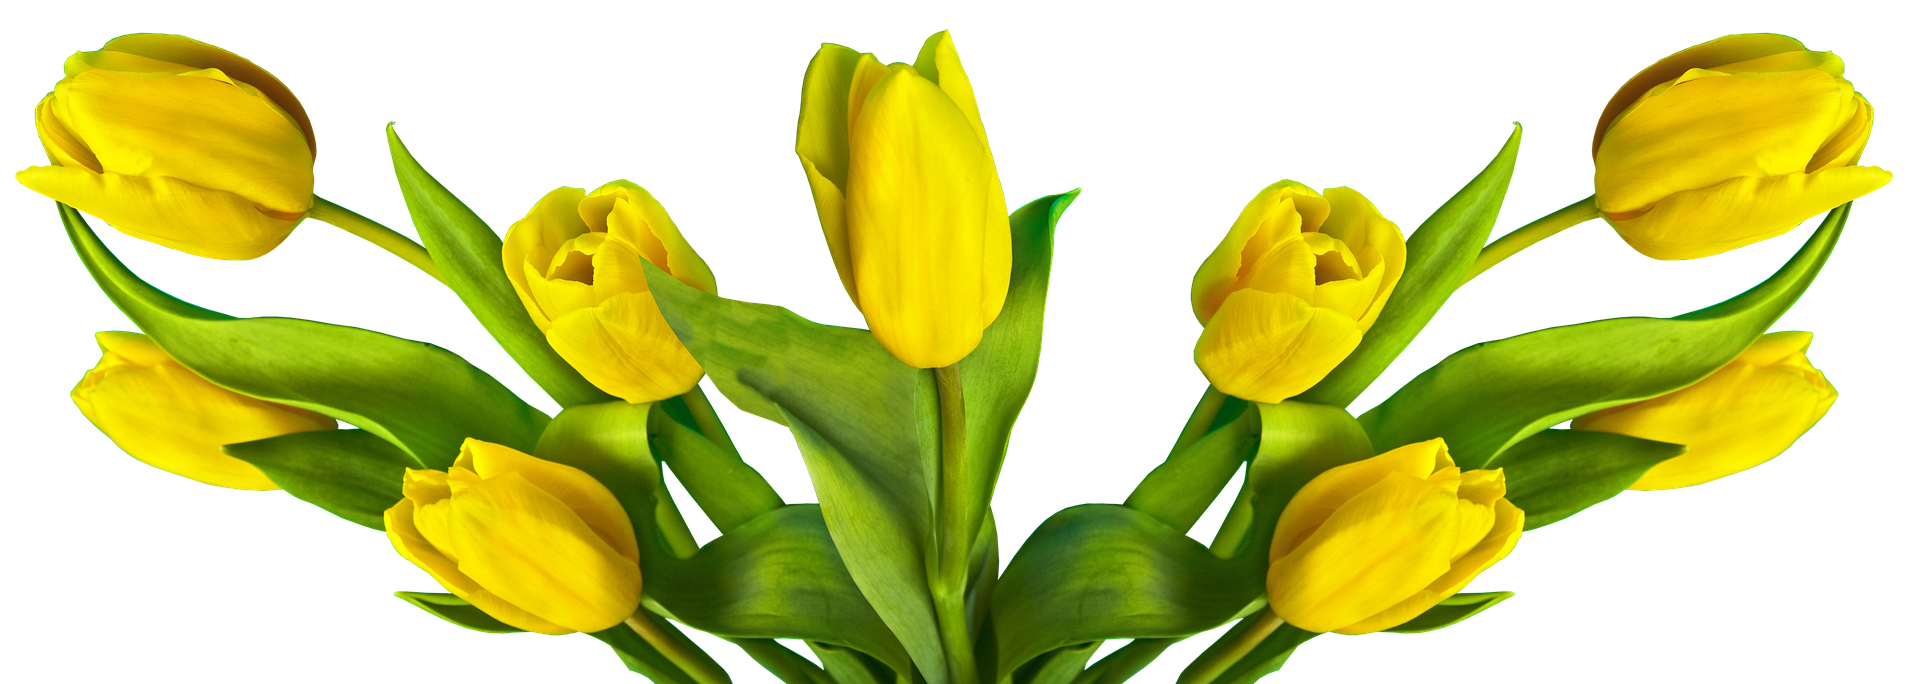 A Group Of Yellow Tulips